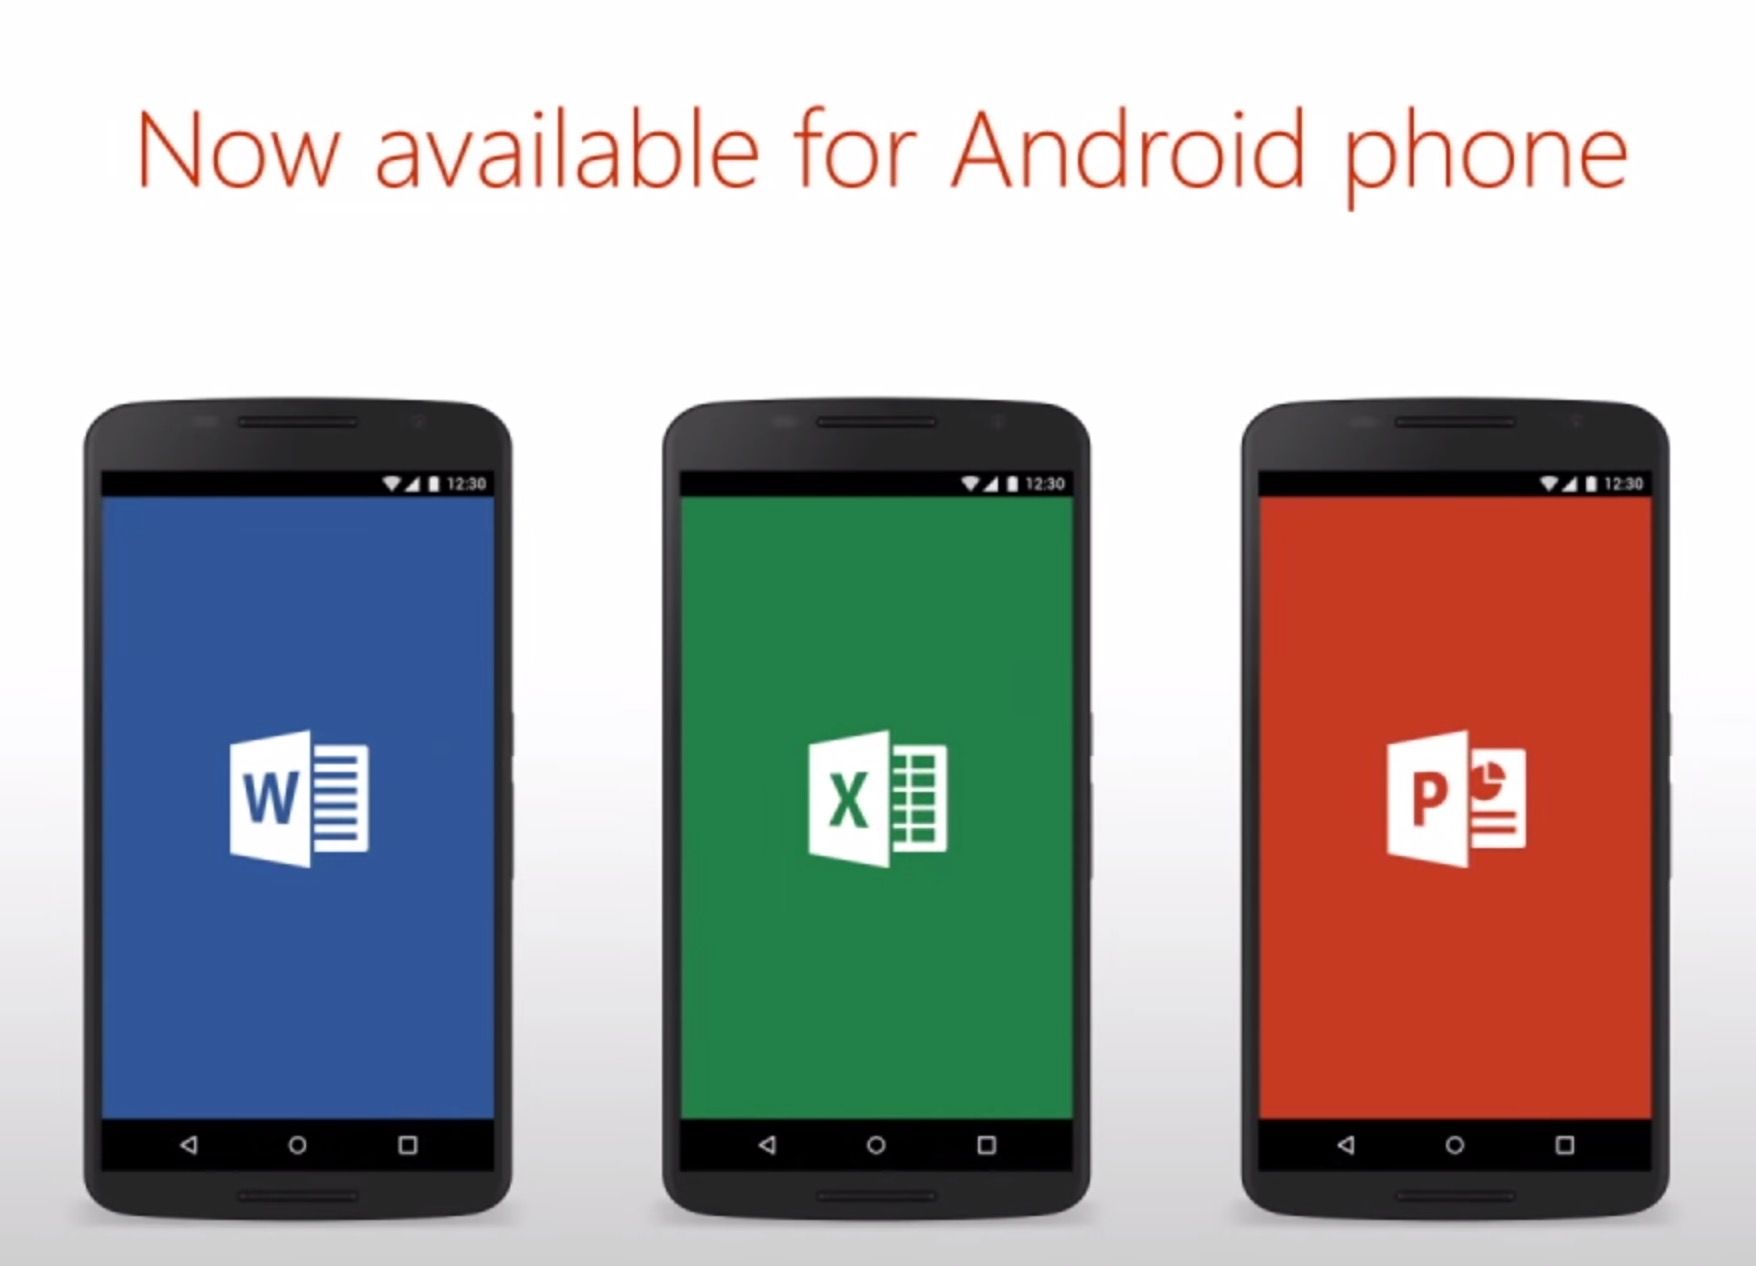 microsoft office officially launches for android phone includes three main apps image 1